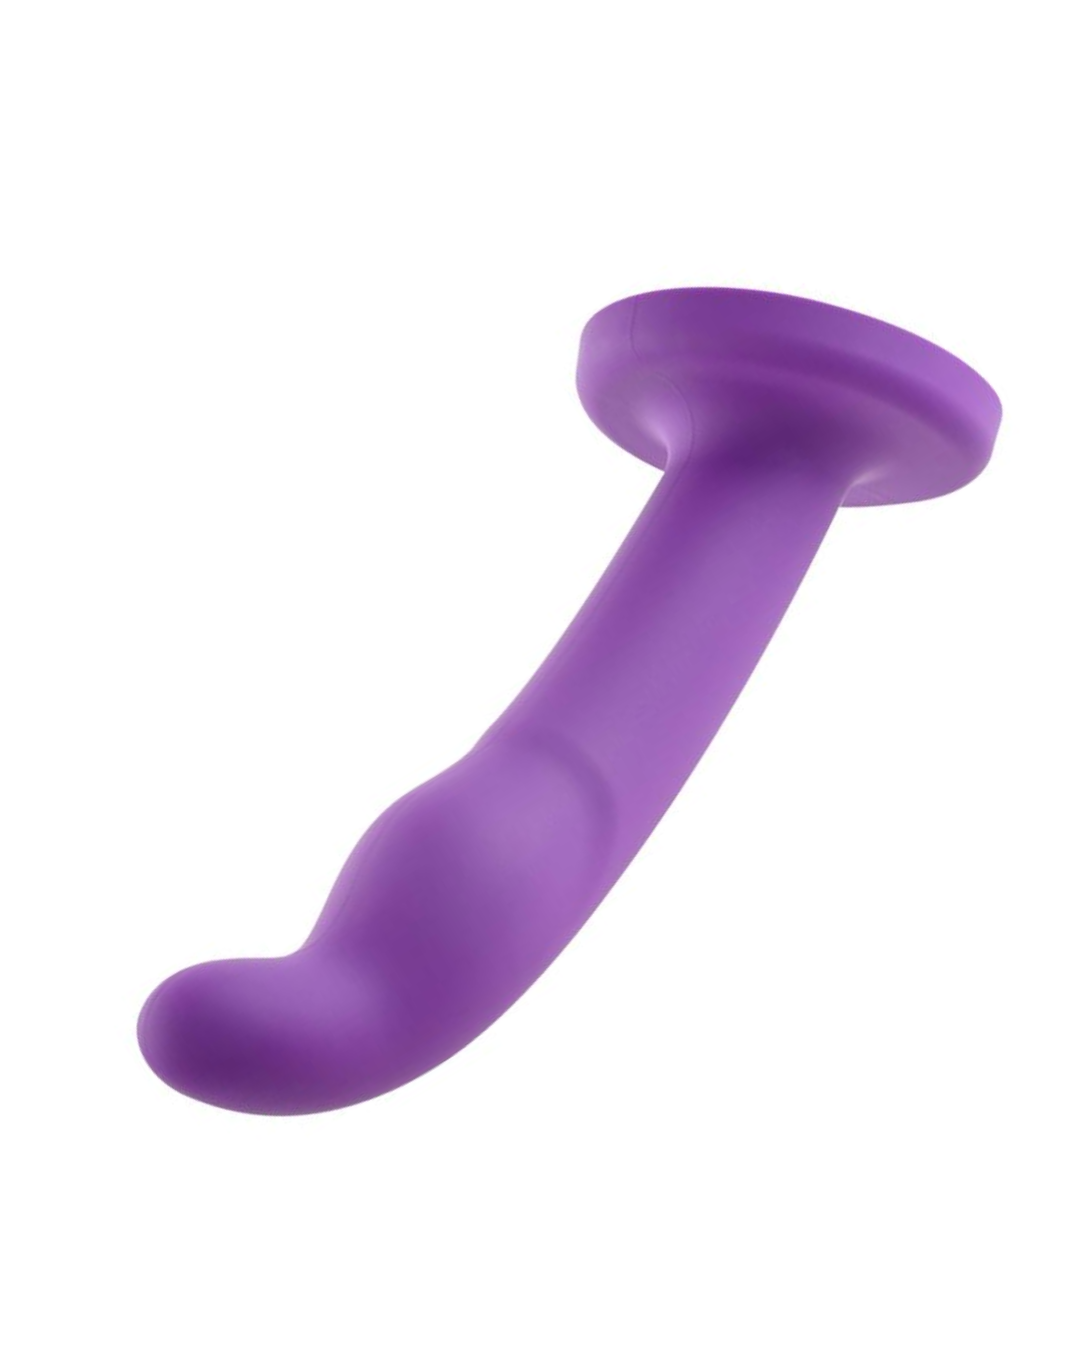 Sportsheets Astil 8" Silicone G-Spot & Prostate Dildo - Purple close up of the curved pinpoint tip